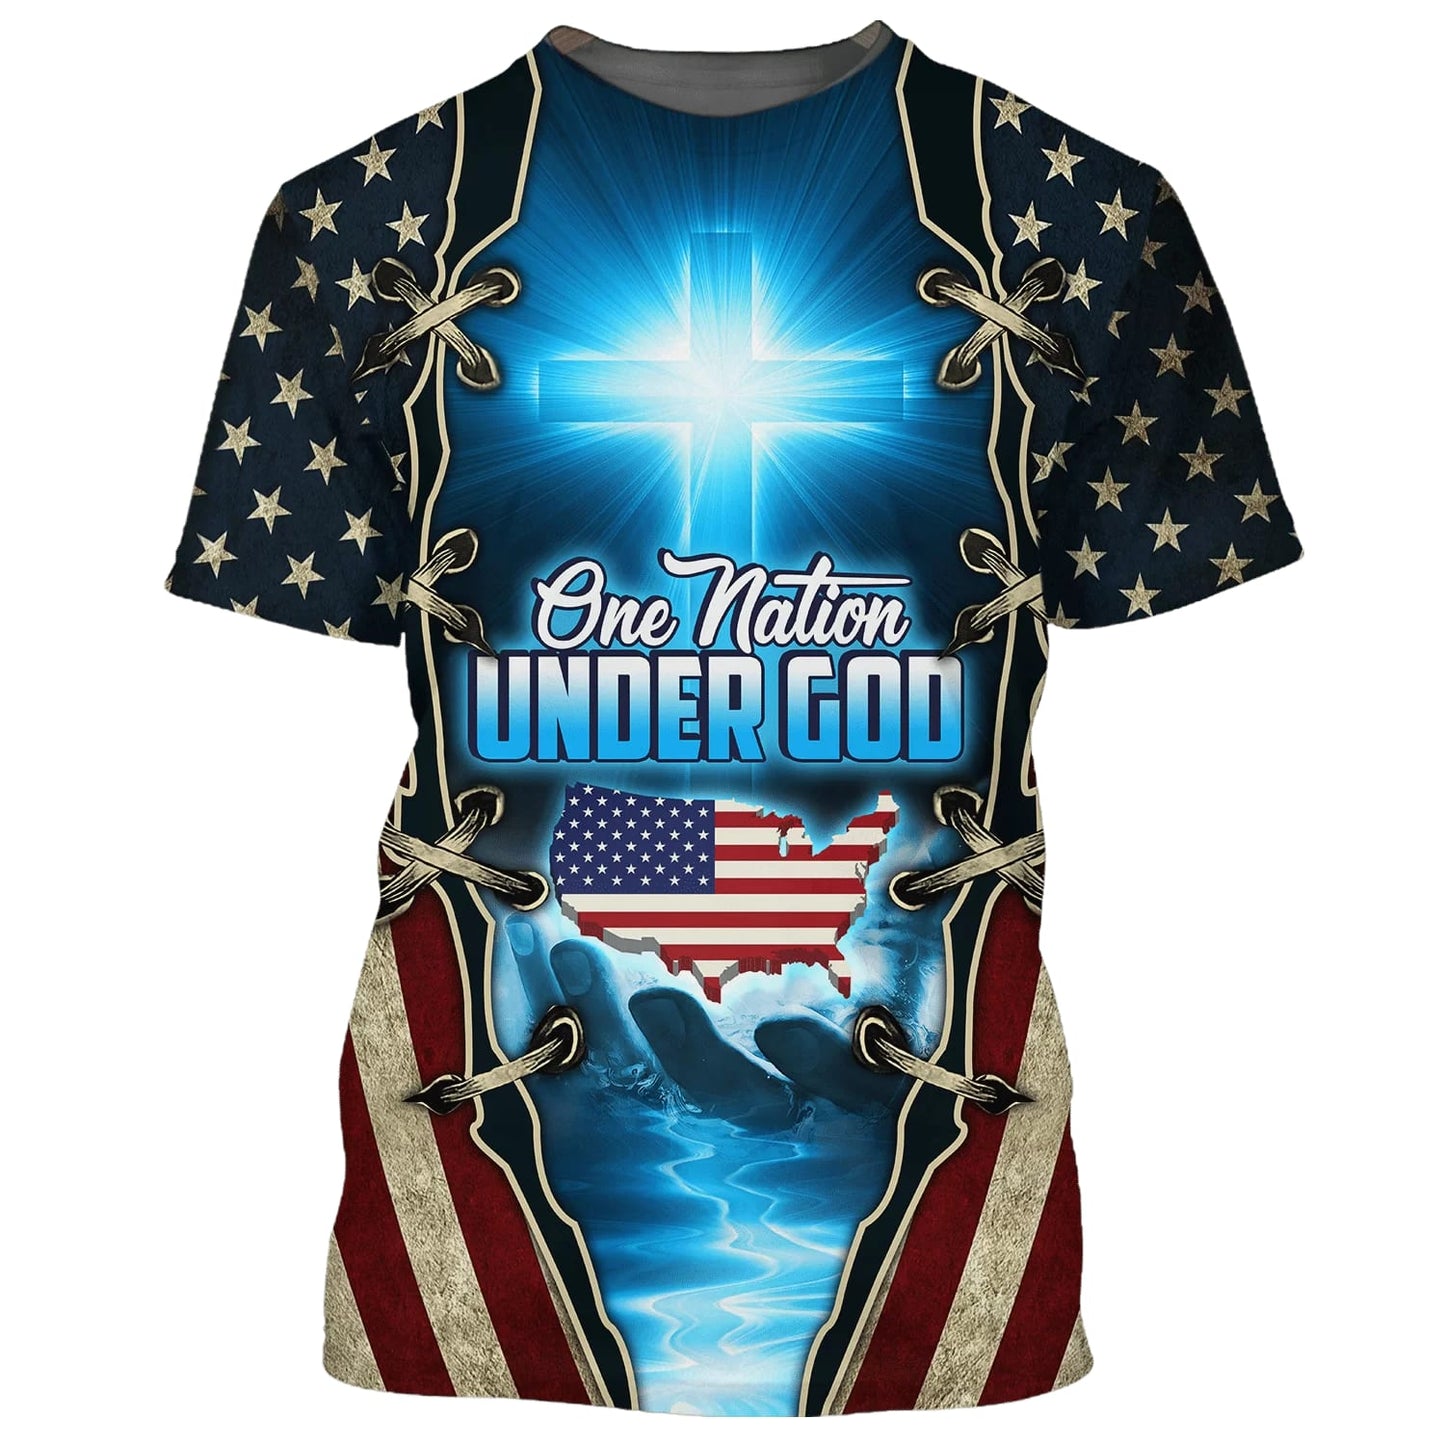 One Nation Under God Patriotic 3d Shirts - Christian T Shirts For Men And Women